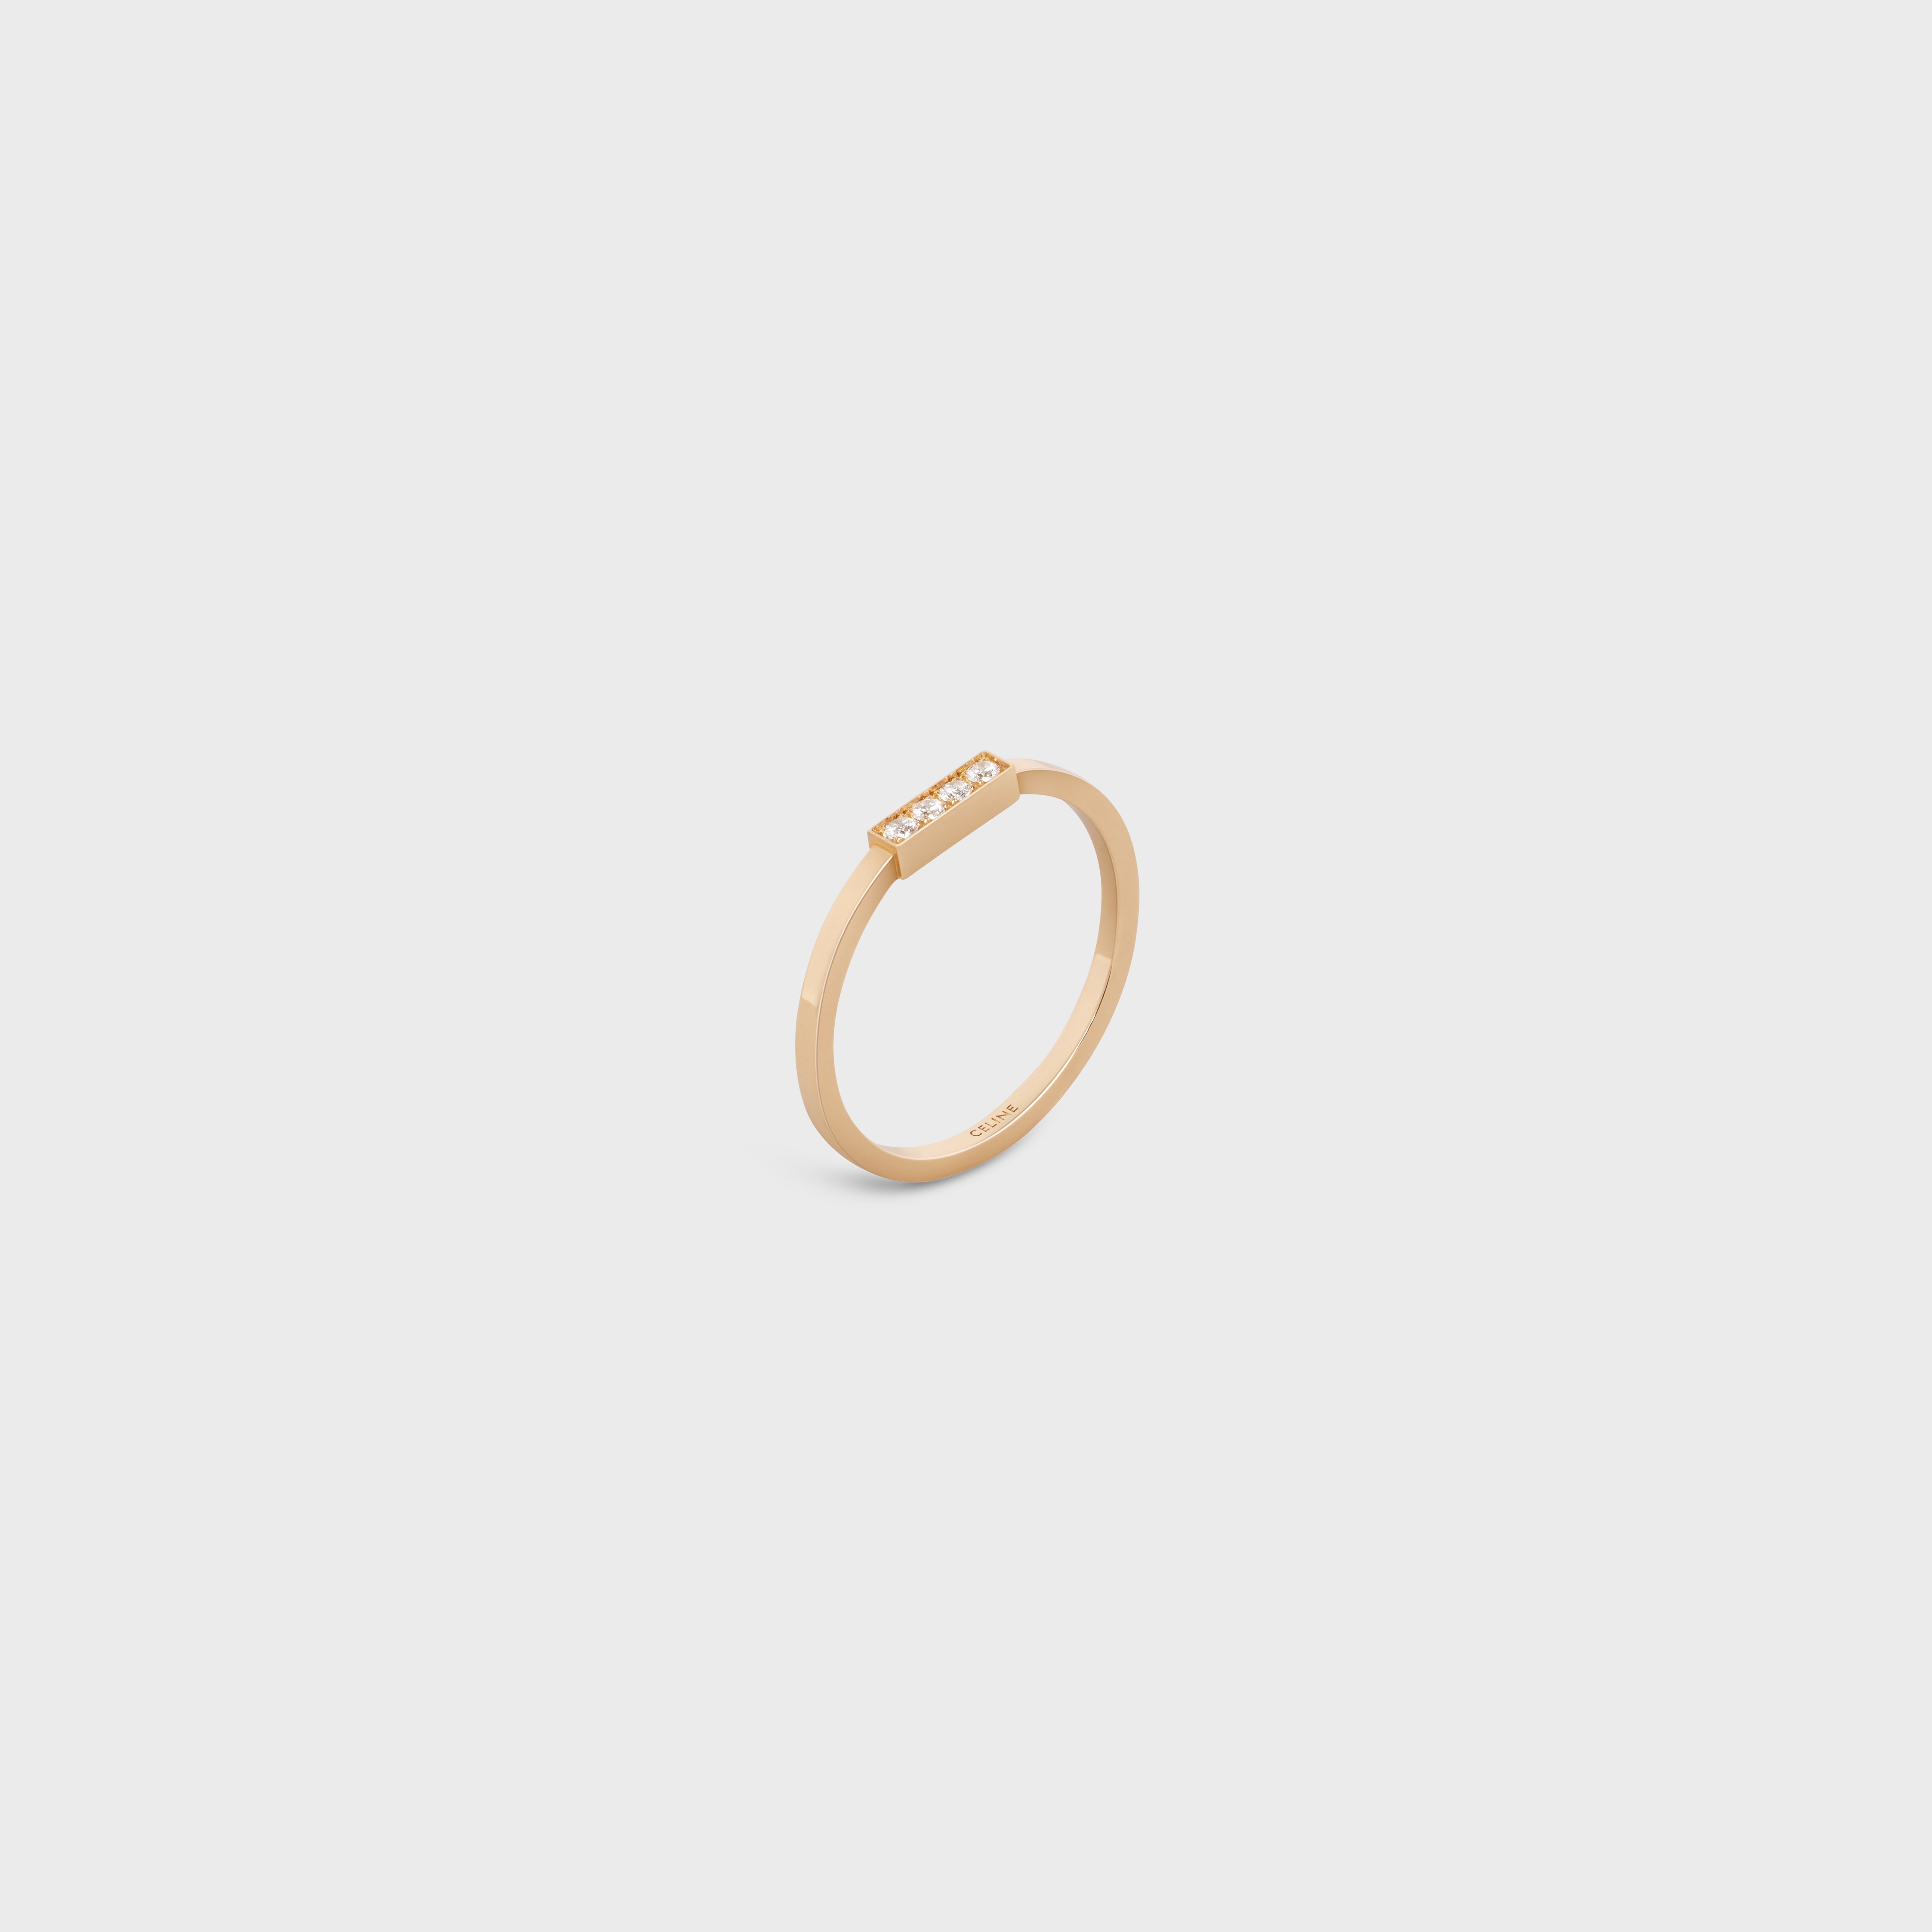 Celine Line Ring in Yellow Gold and Diamonds - 2